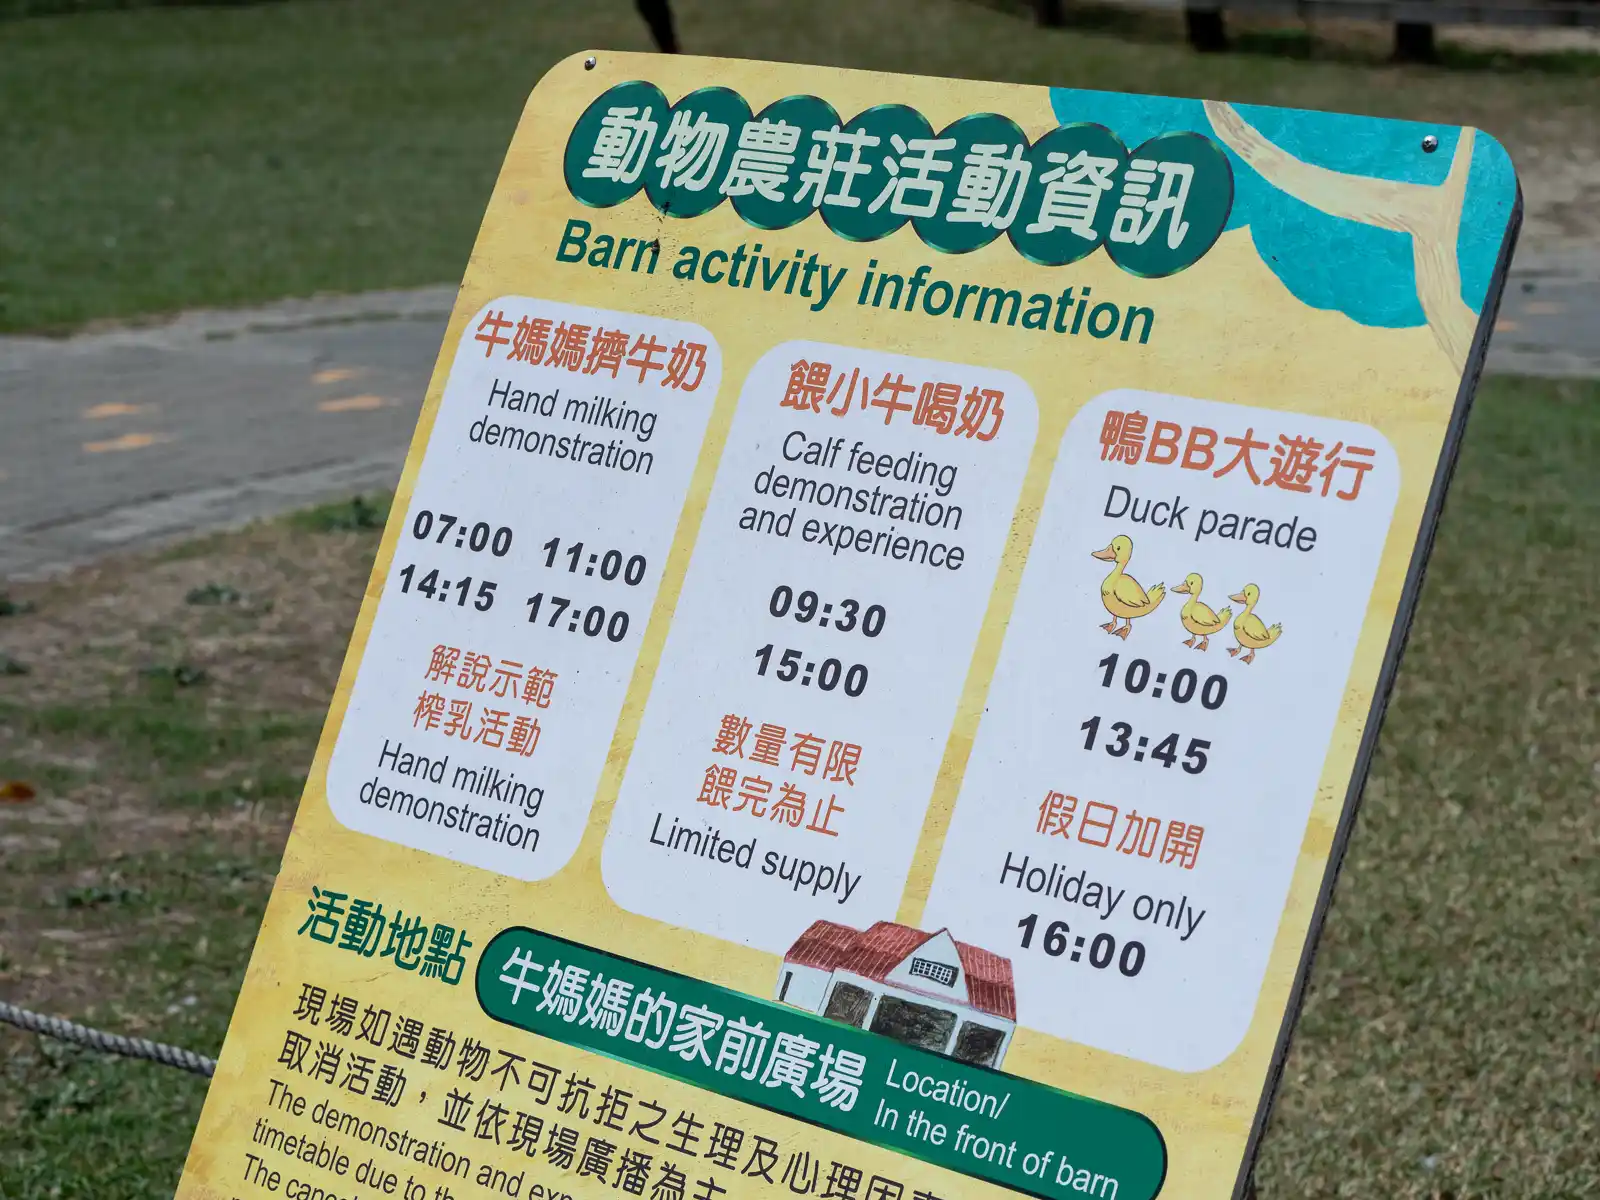 Activity information is displayed in English.